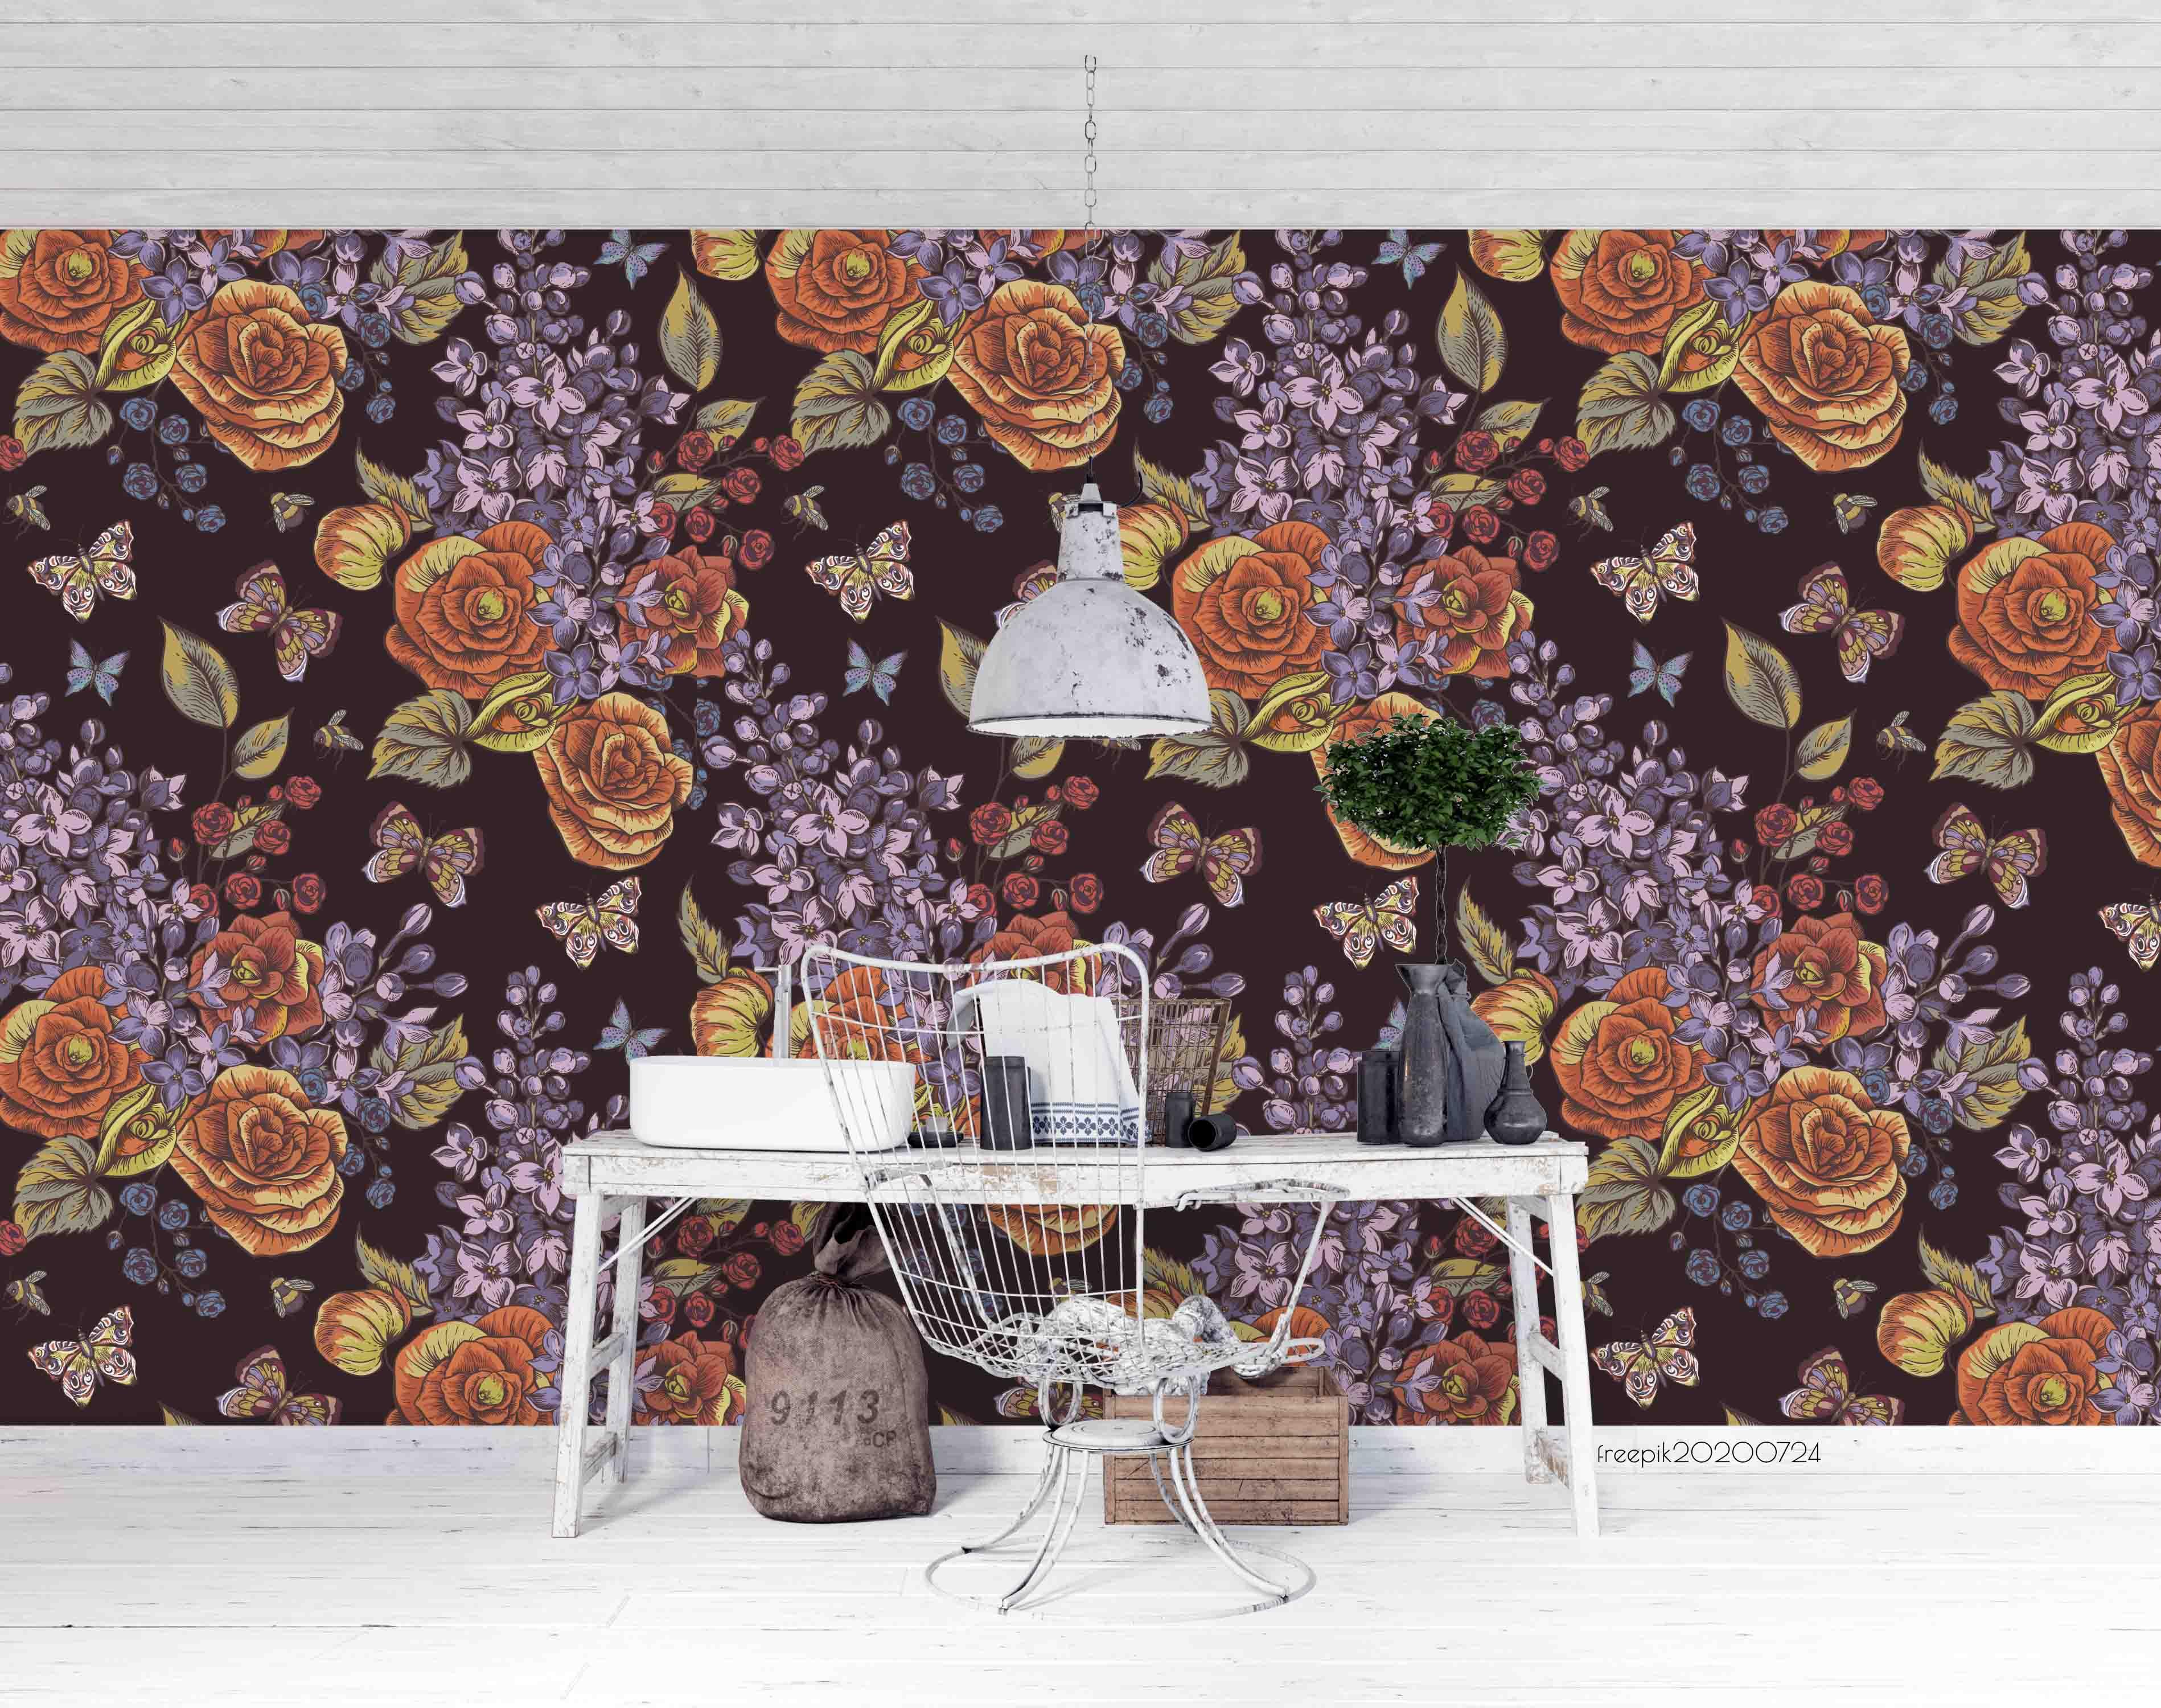 3D Vintage Hand Sketching Colorful Floral Wall Mural Wallpaper LXL 570- Jess Art Decoration